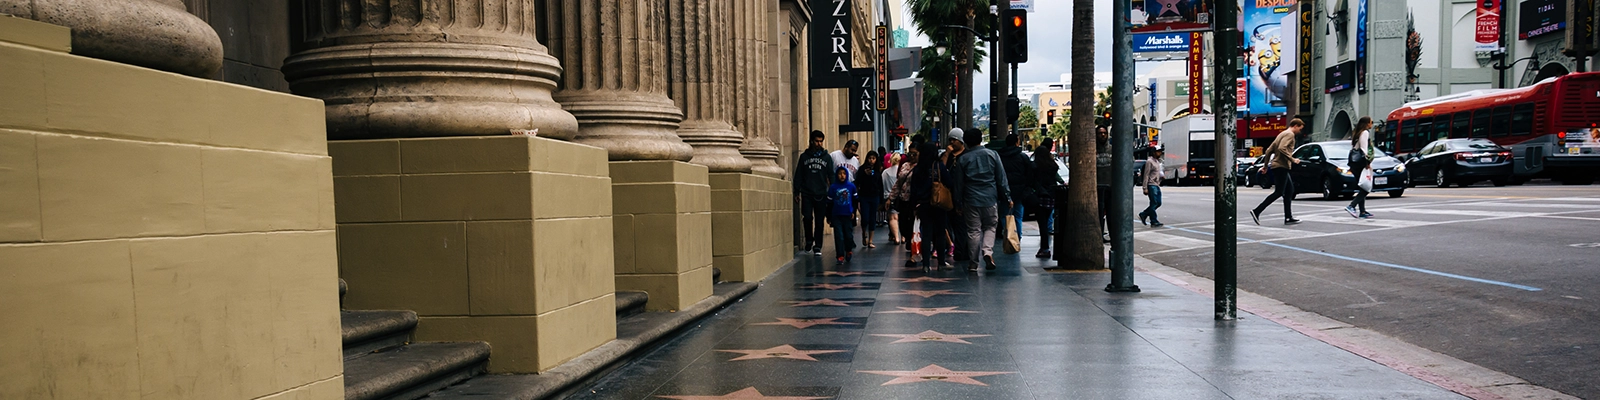 Group of tourists admiring the stars on the Hollywood Walk of Fame